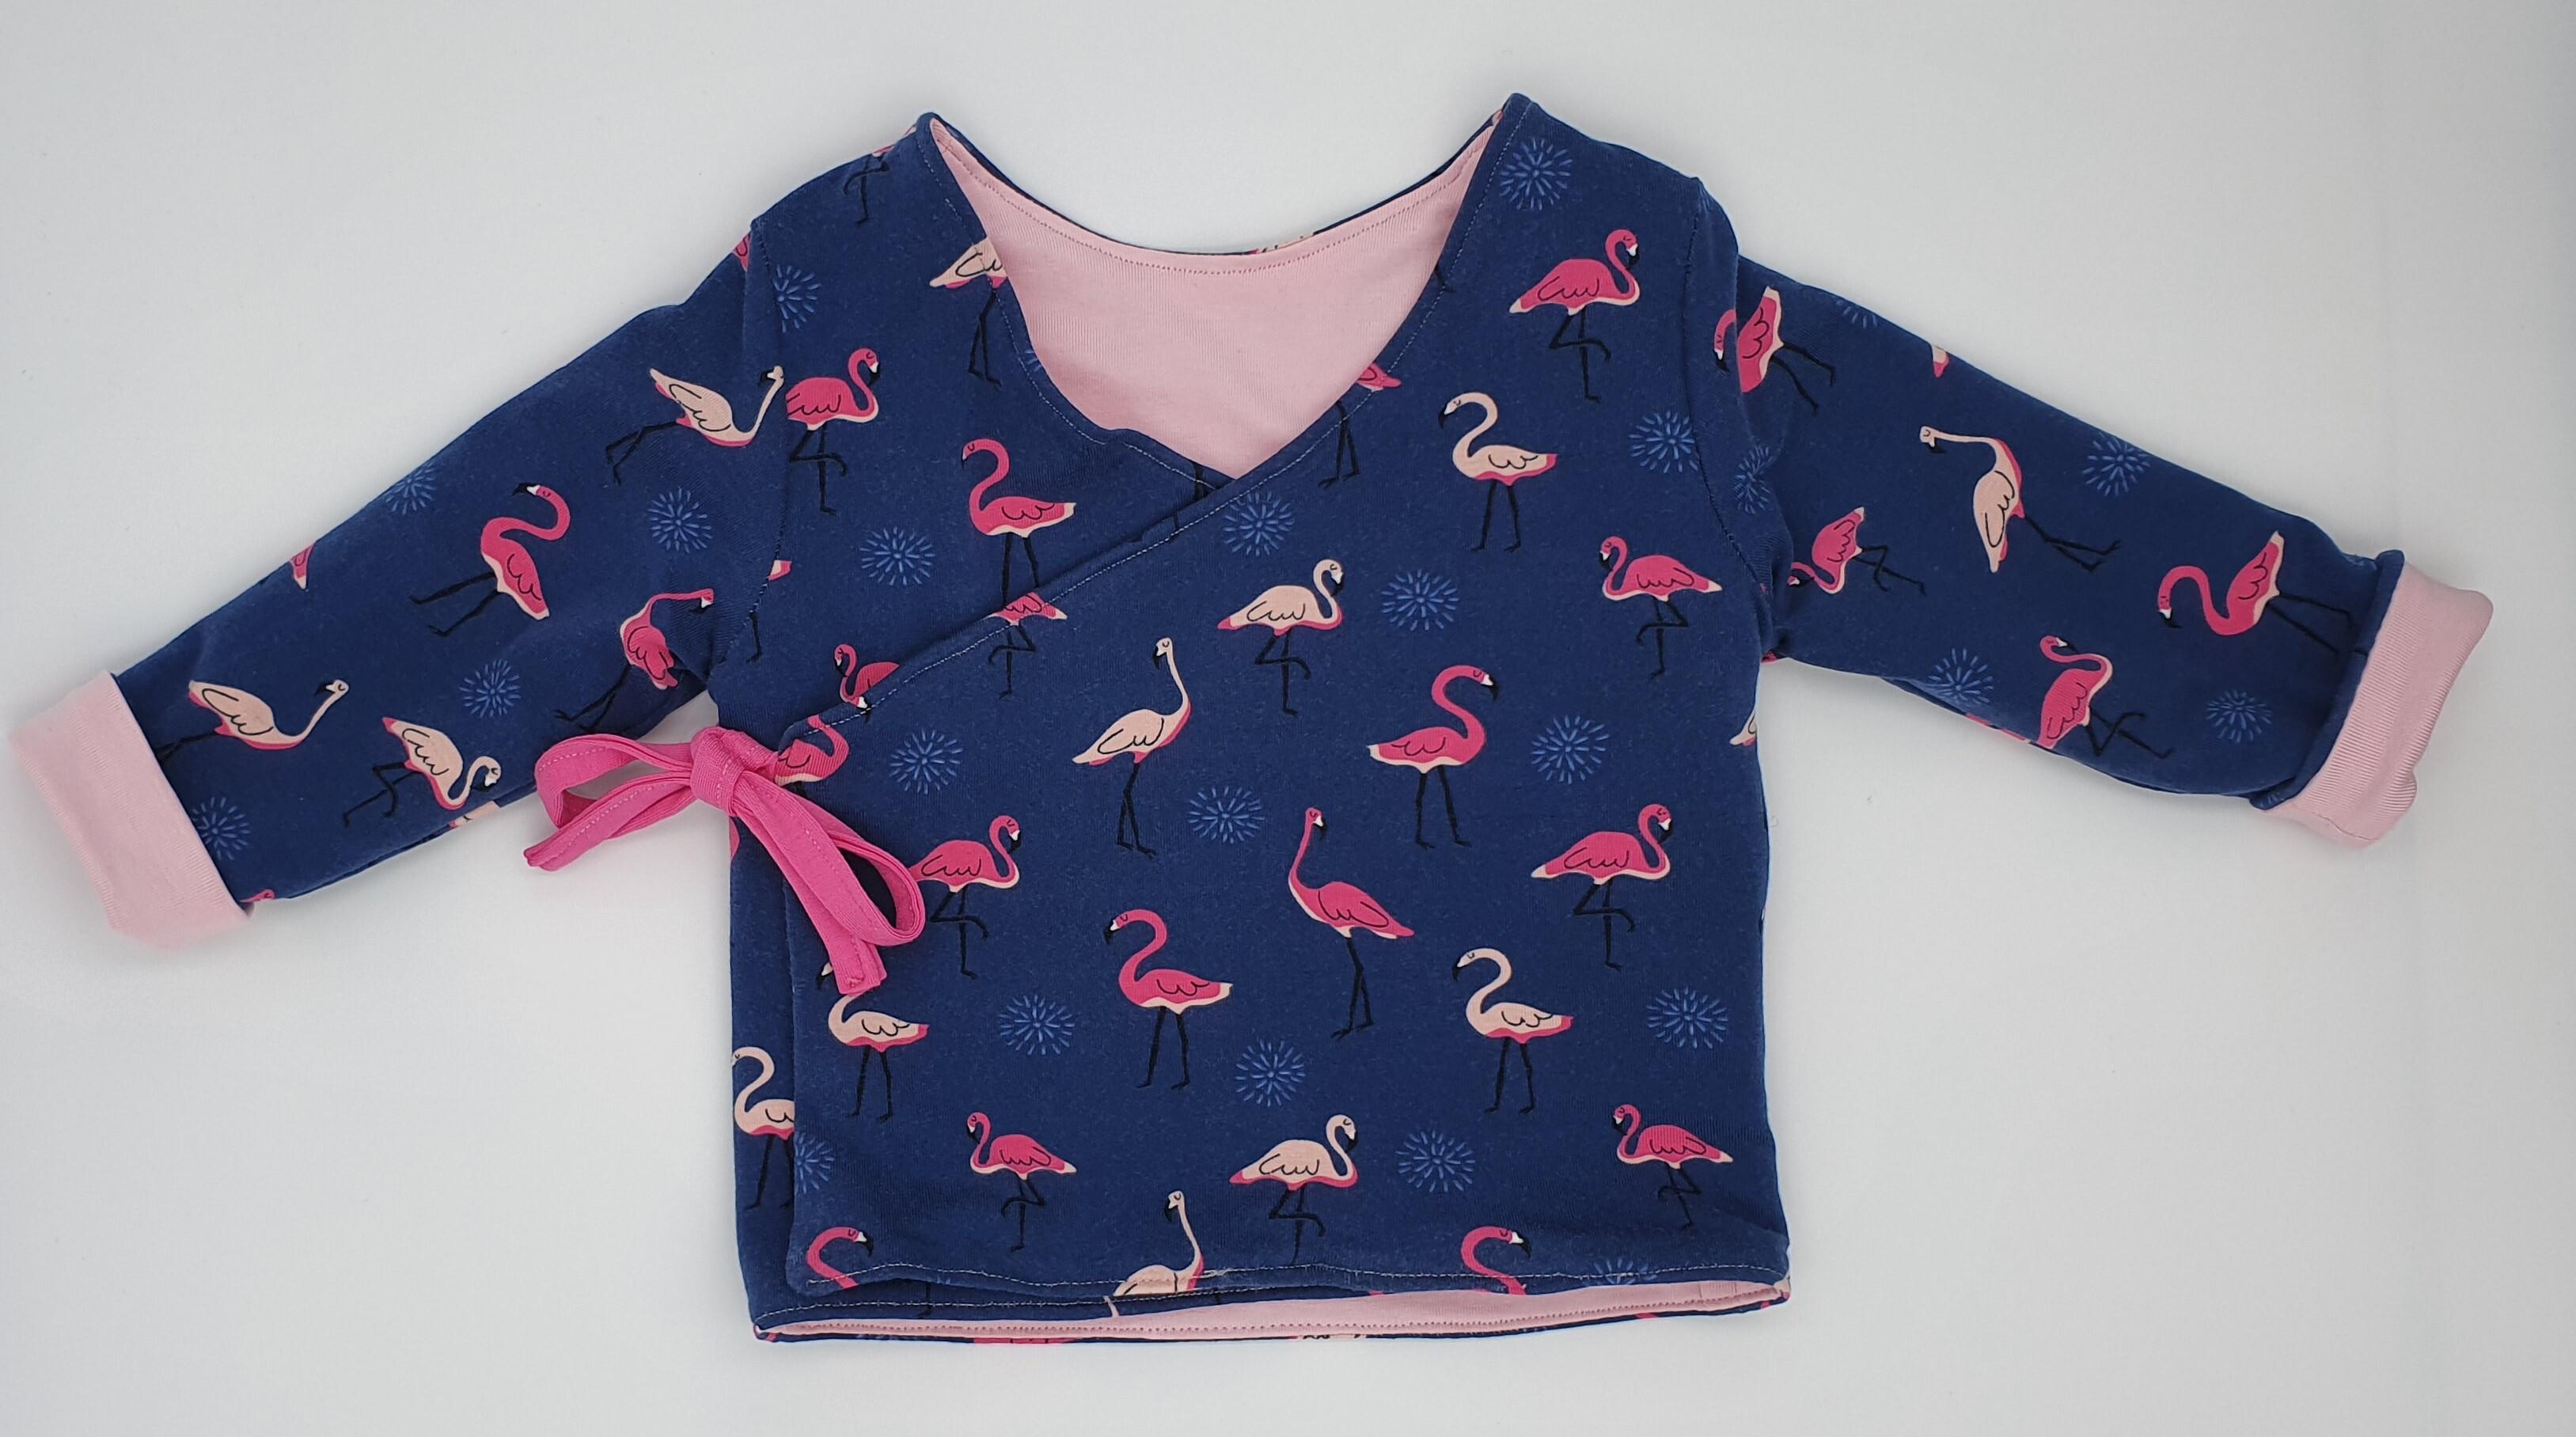 Reversible pink and blue flamingo cardigan 2 sides = 2 looks!